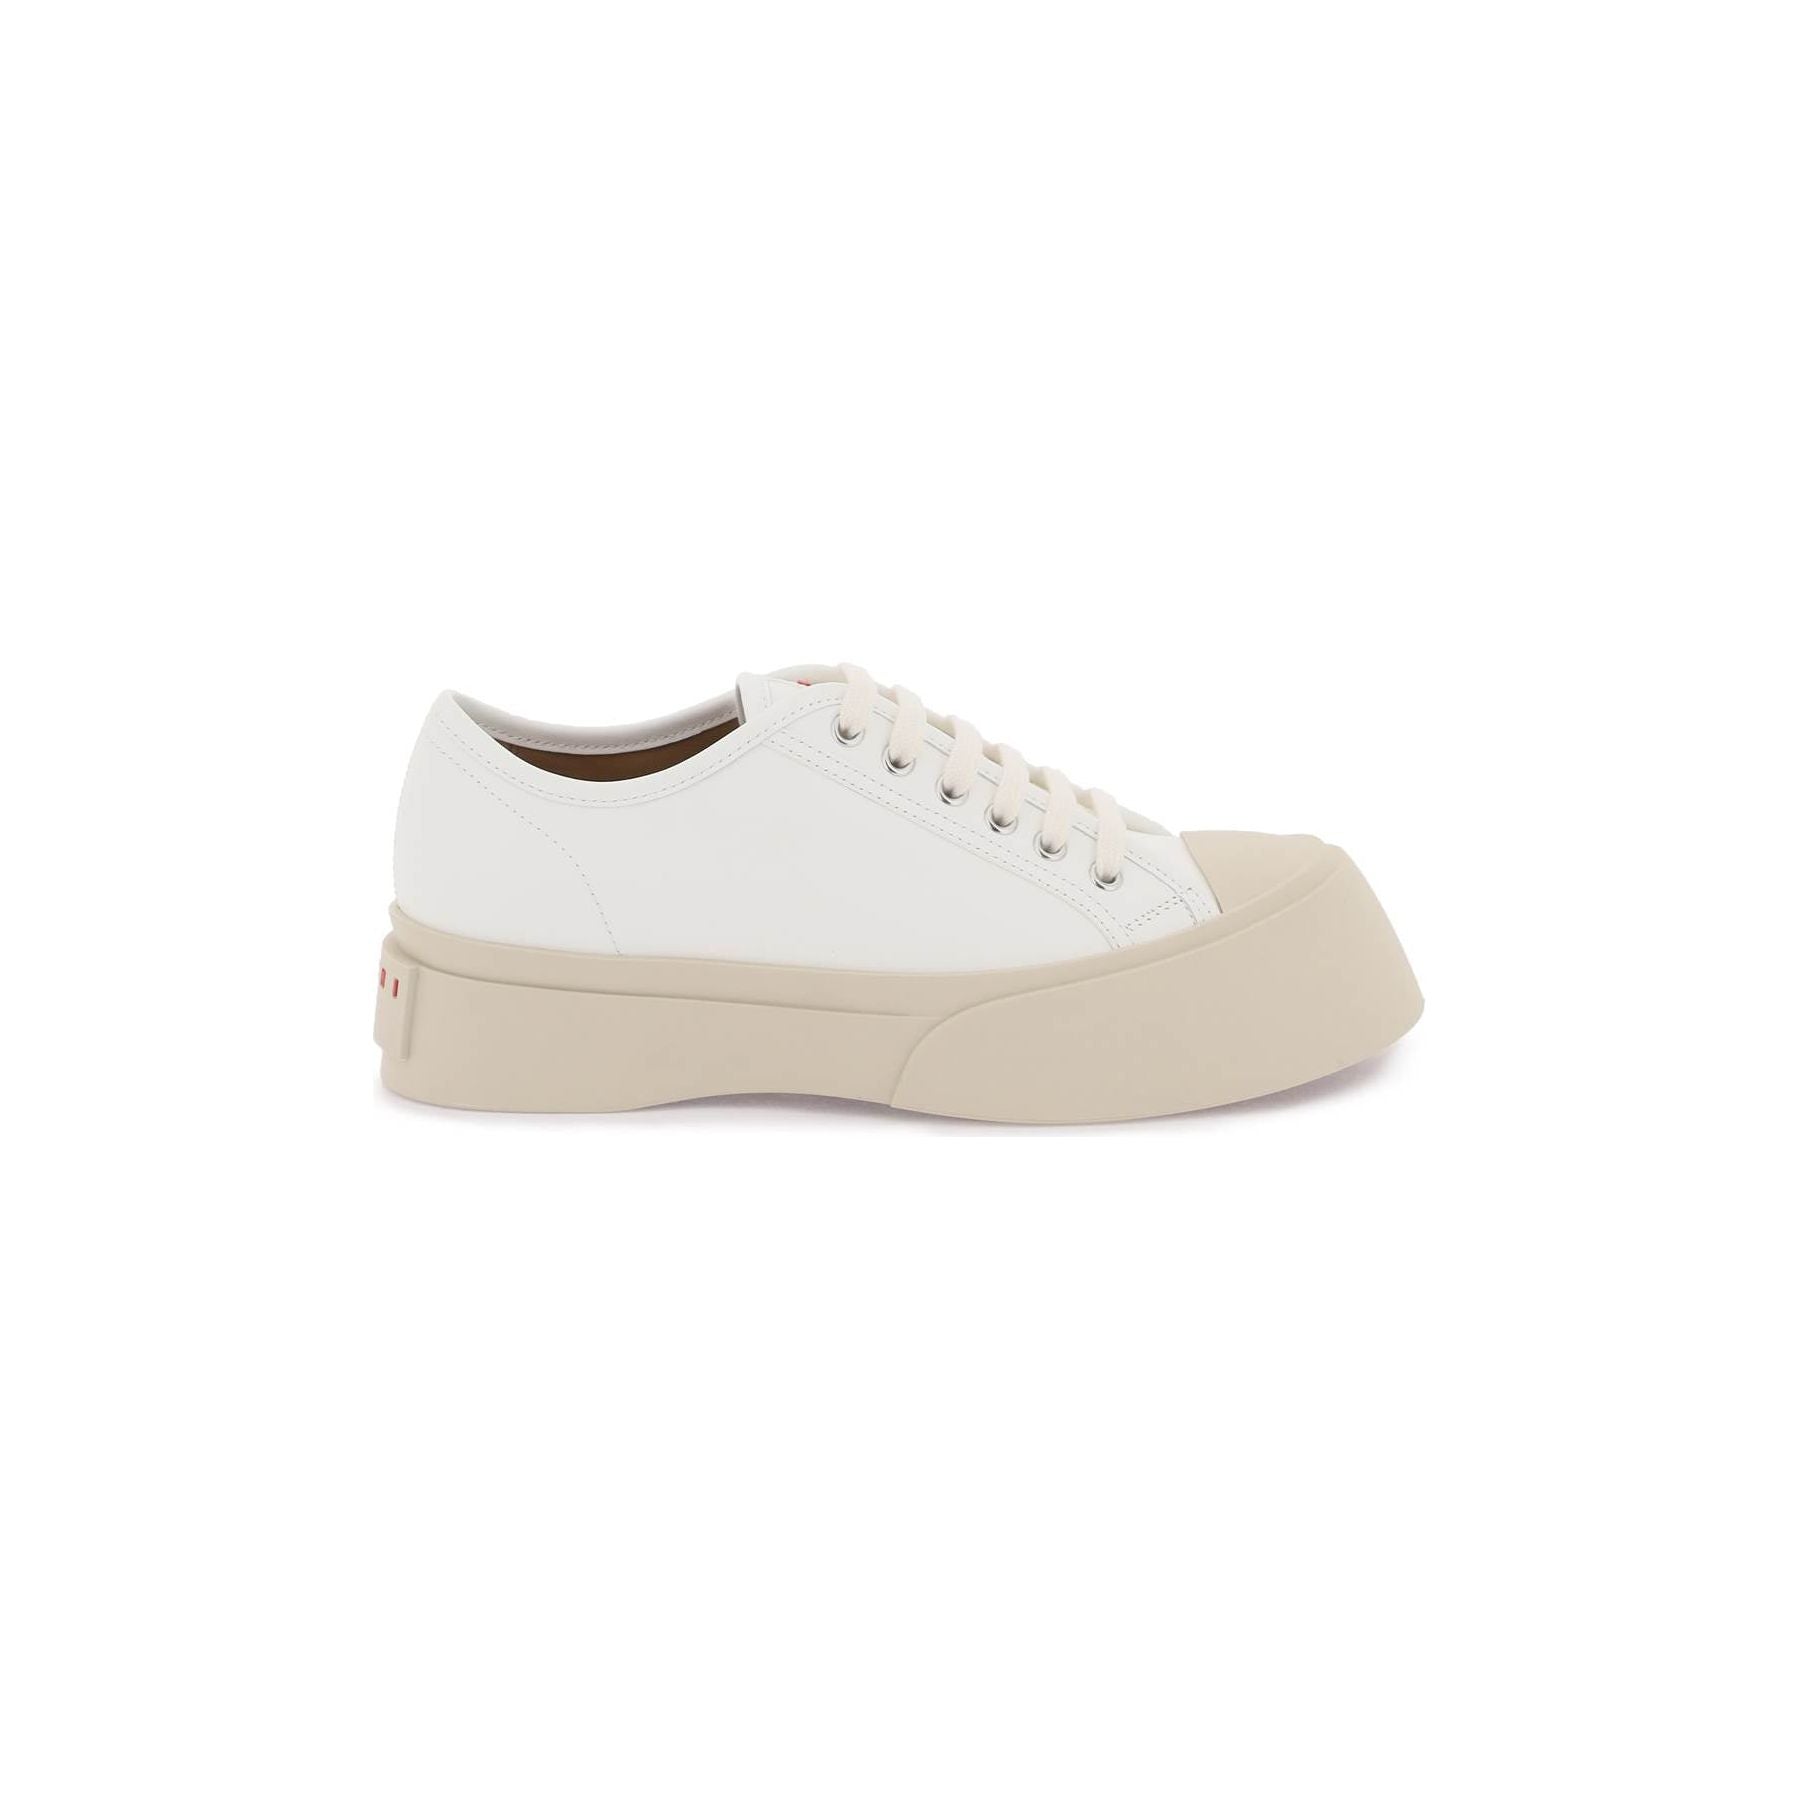 Nappa Leather Pablo Sneakers